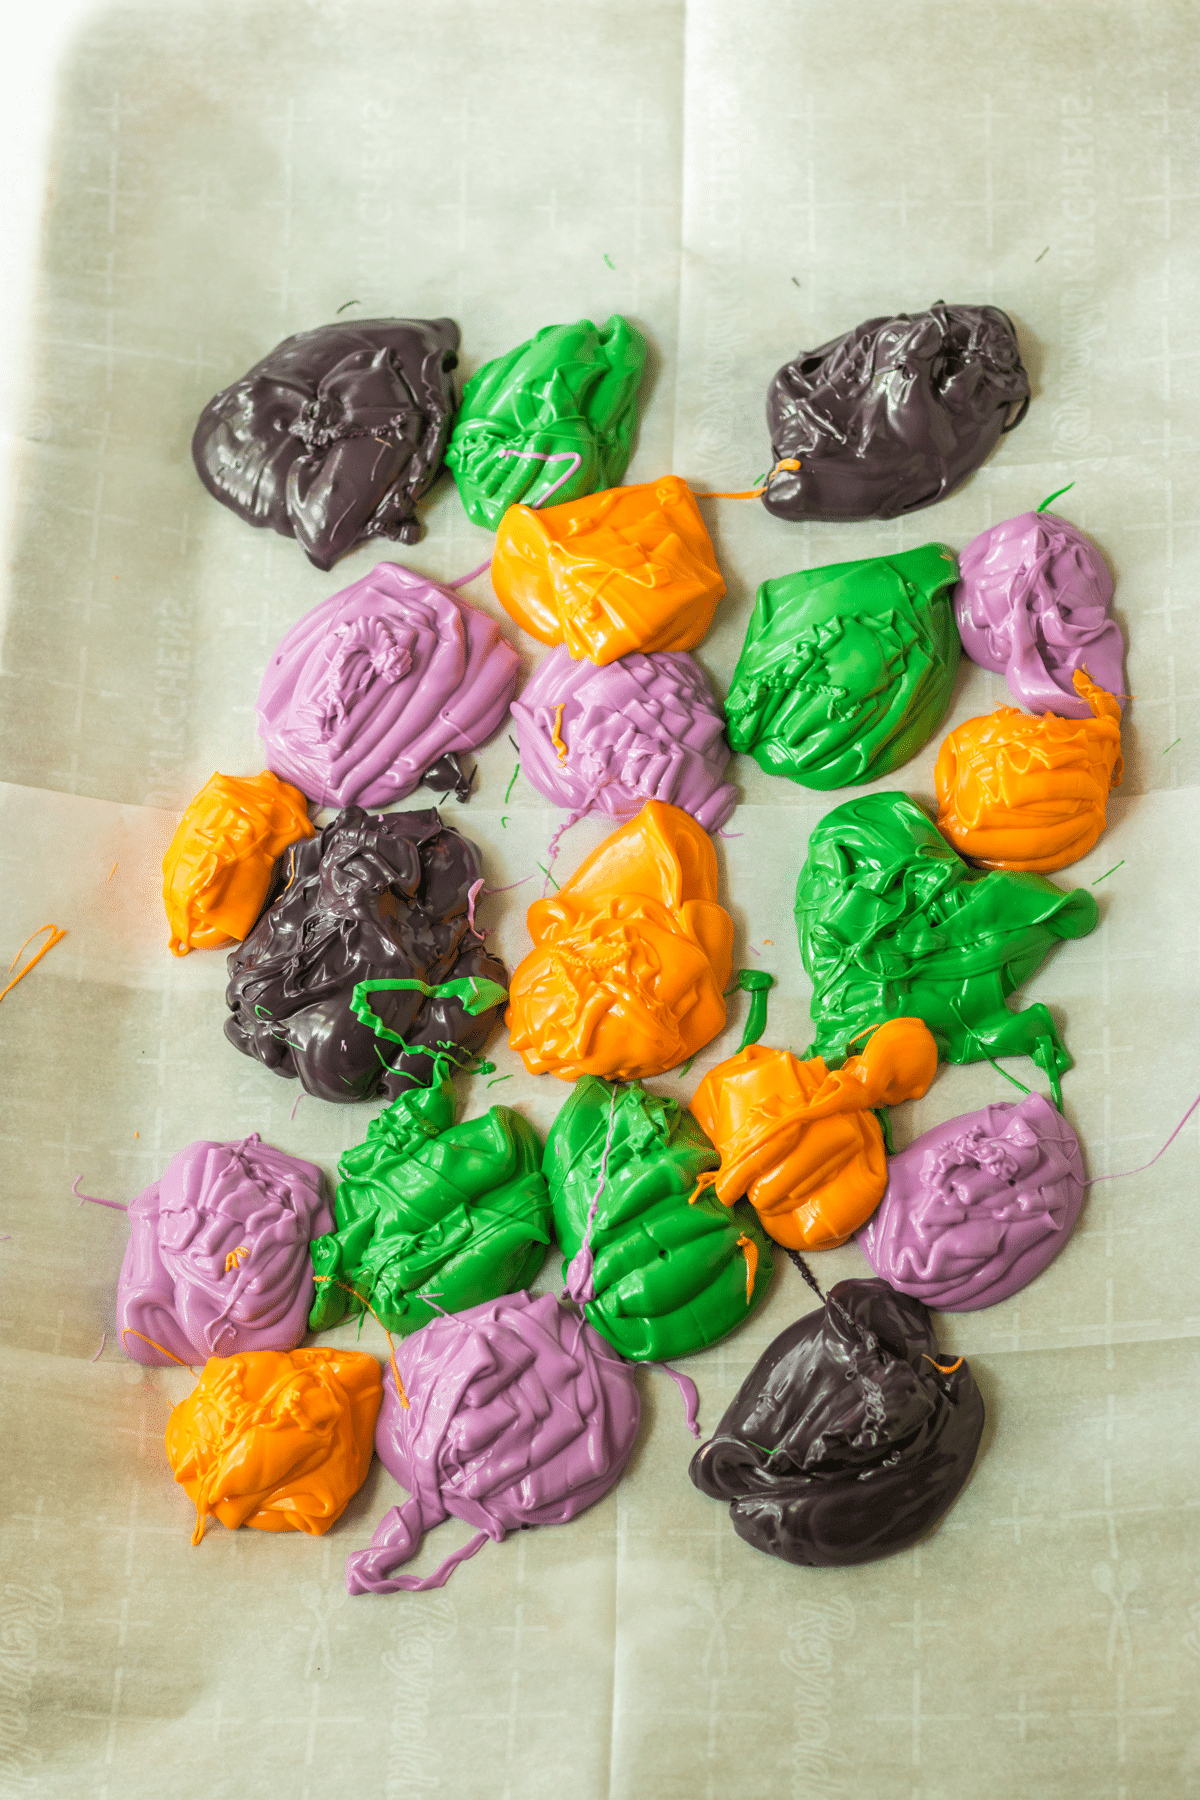 Next step in making Halloween Cookie Bark is to put dollops of the colors all over the lined sheet pan and swirl them together.